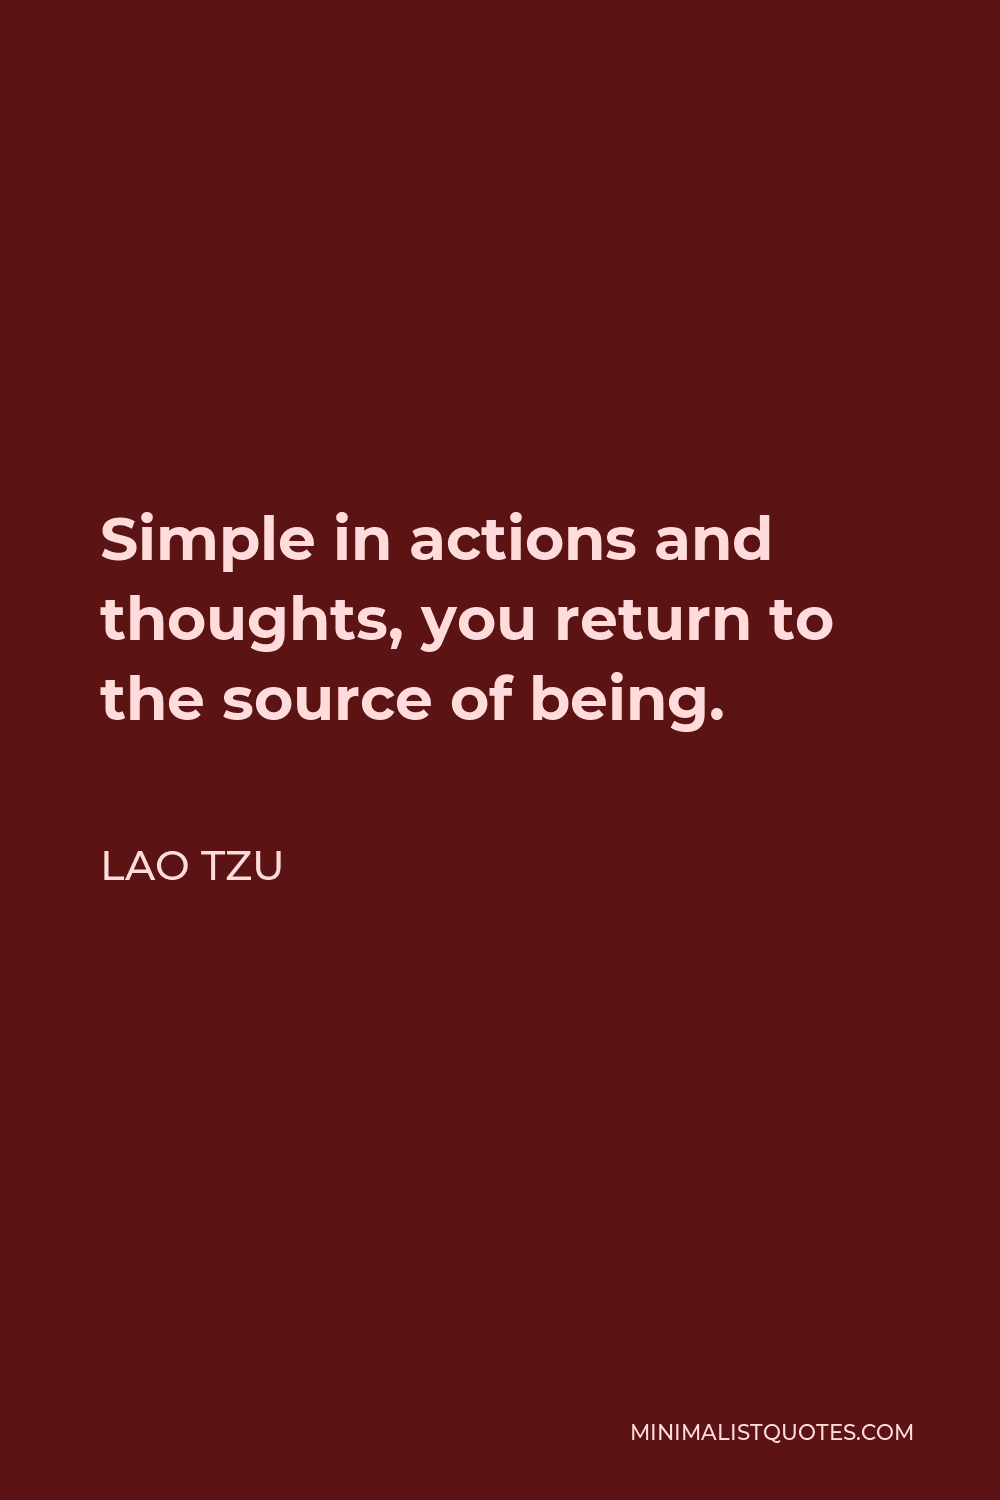 Lao Tzu Quote - Simple in actions and thoughts, you return to the source of being.